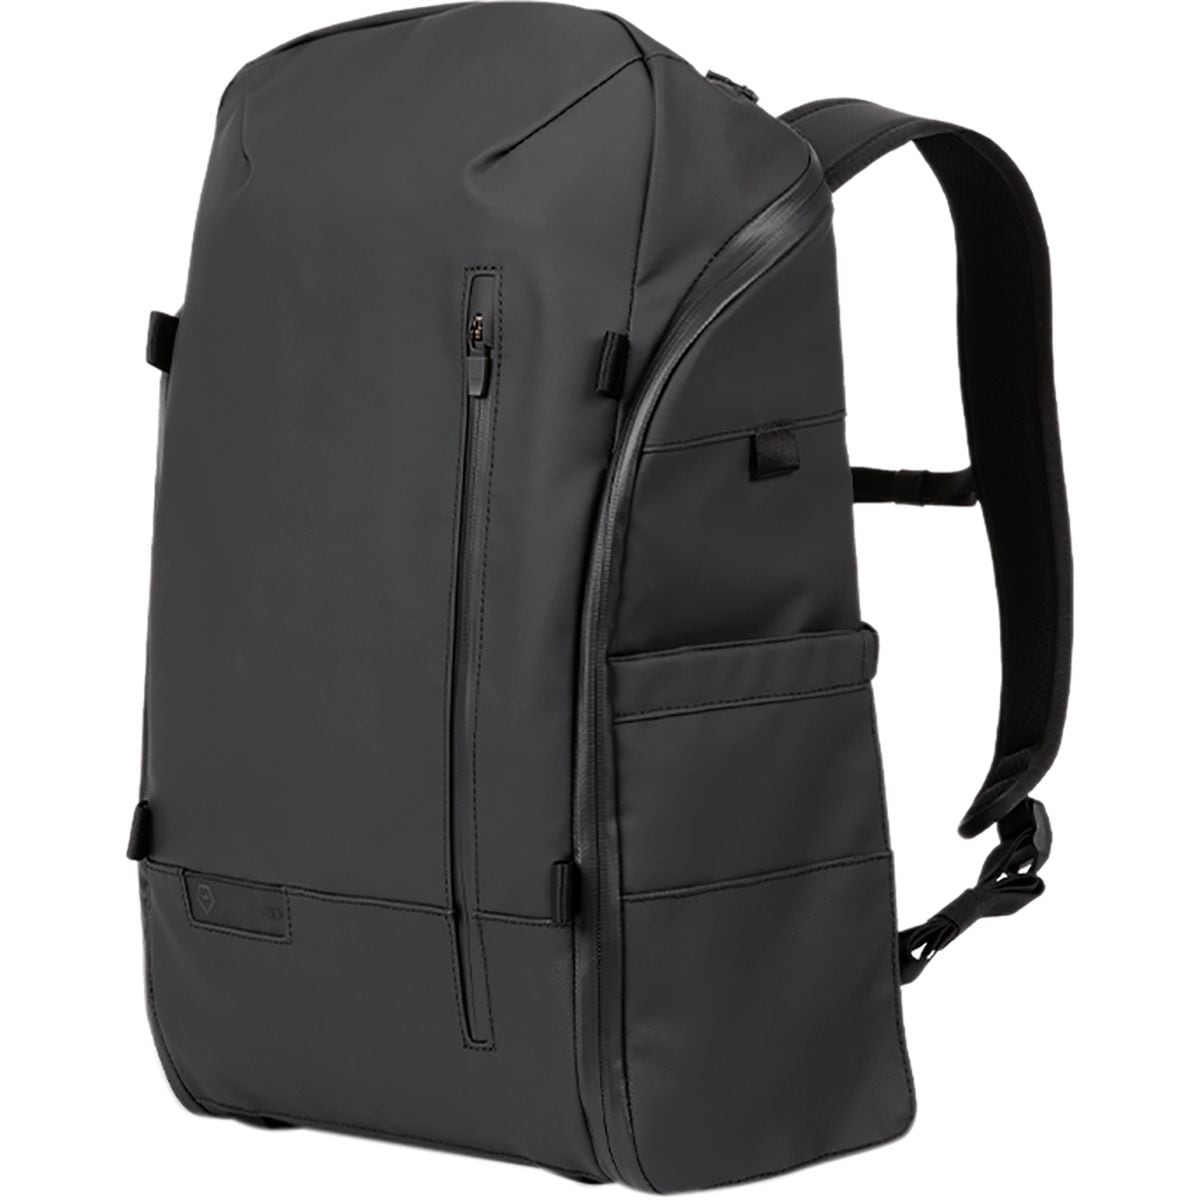 WANDRD DUO Day Pack